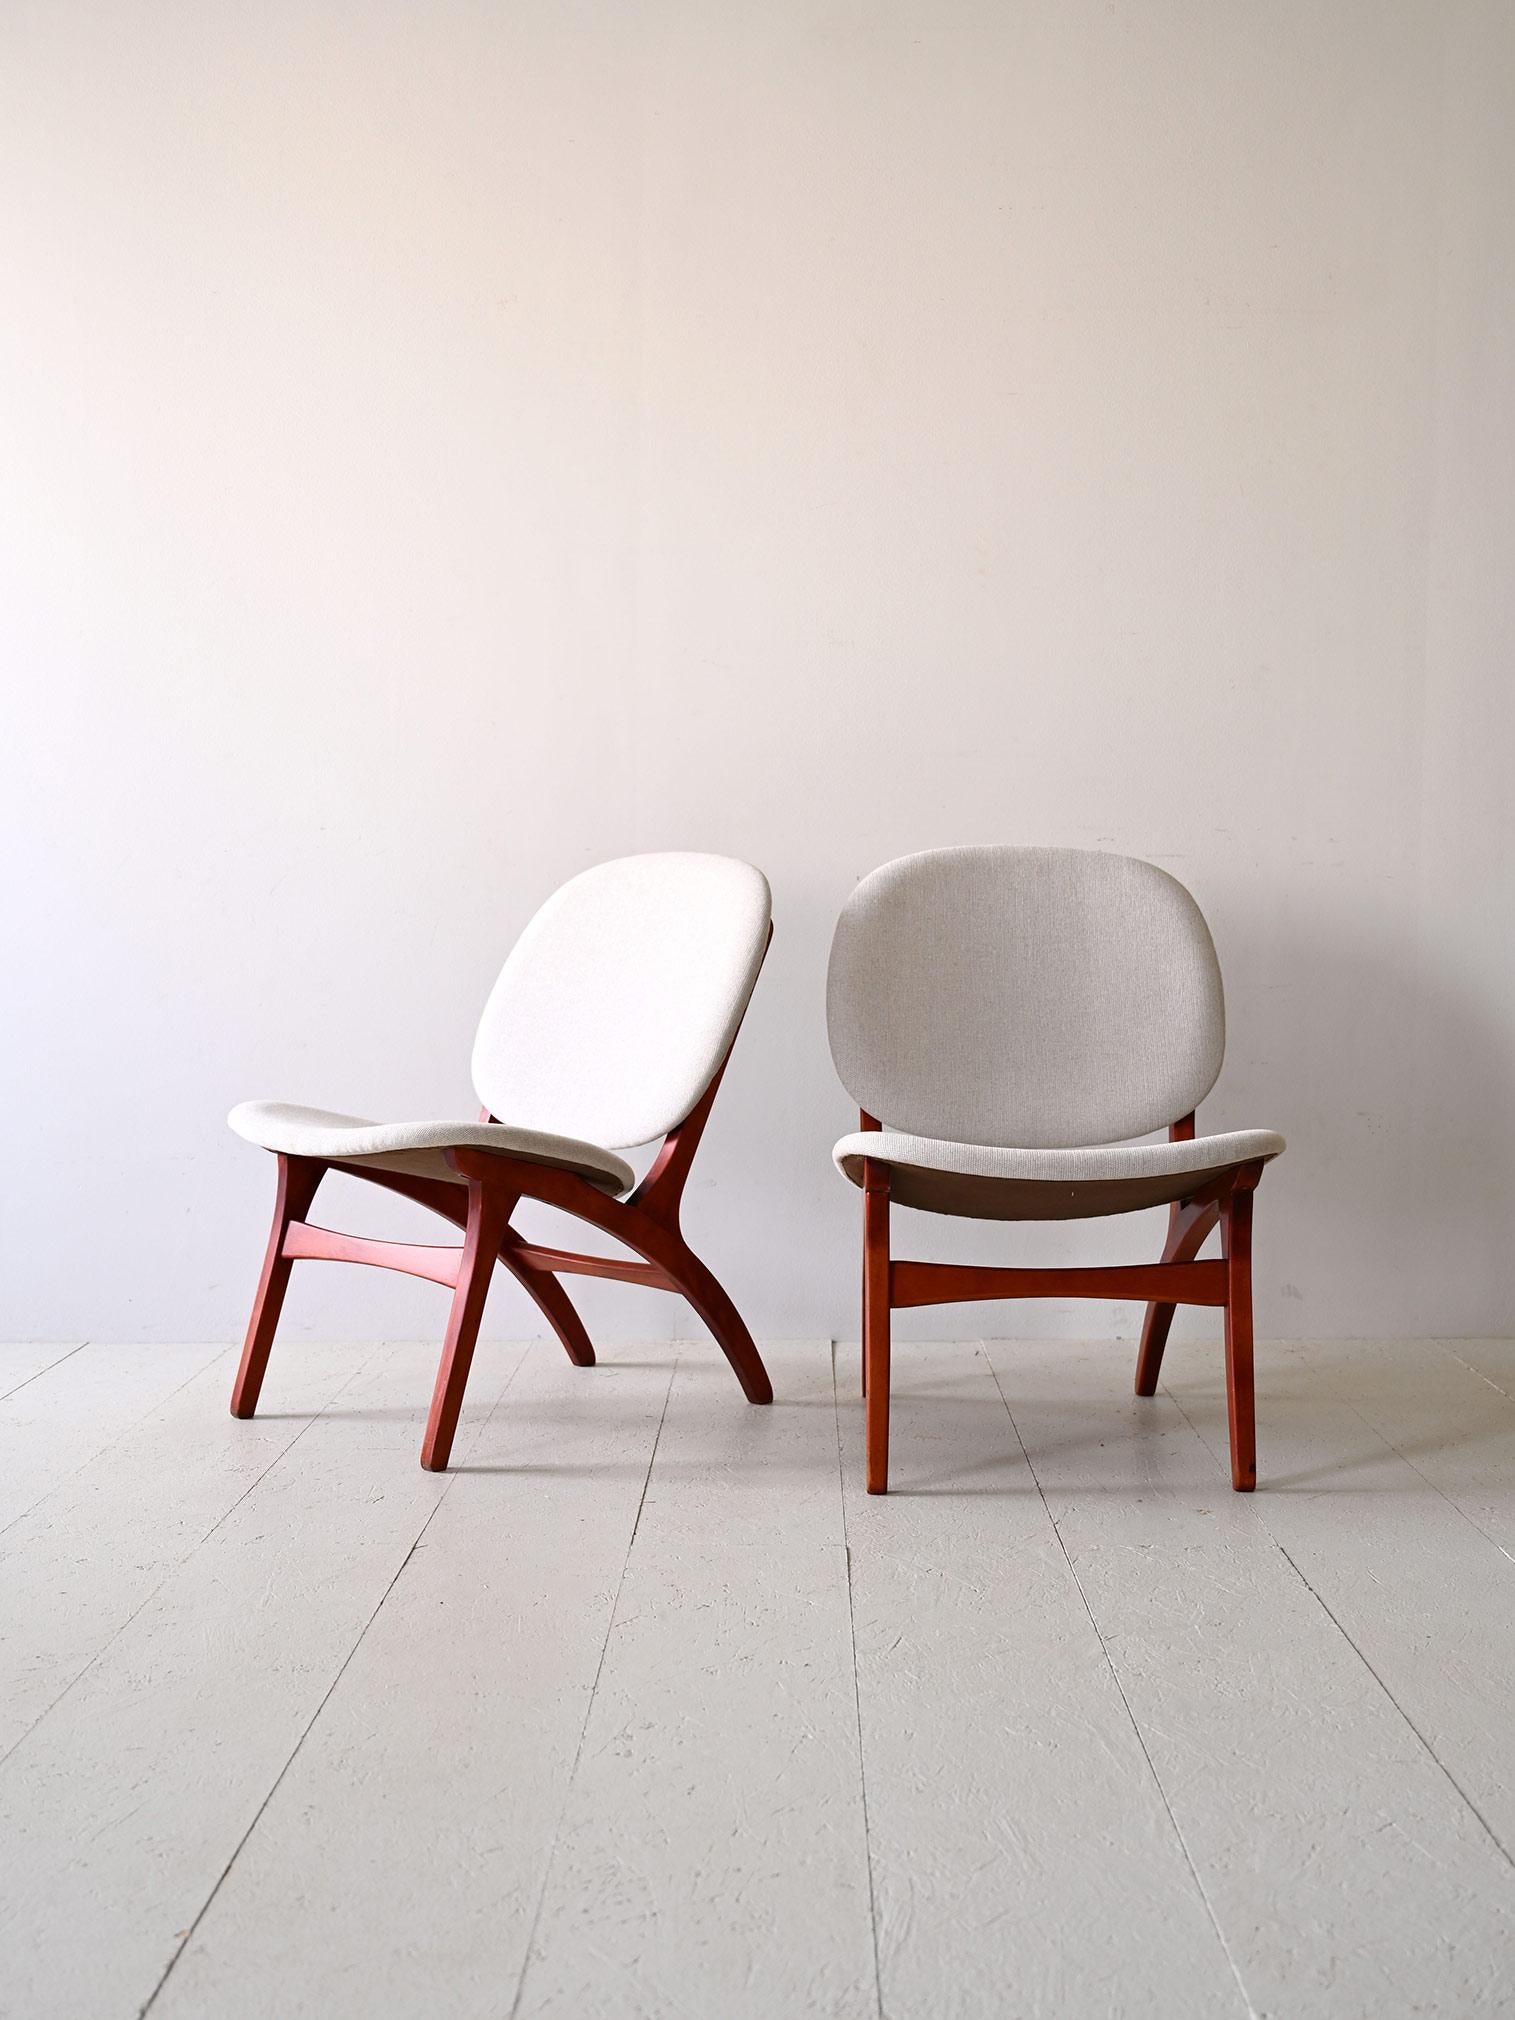 Pair of Nordic armchairs with white fabric  designed by Carl Edward Matthes in the 1950s.

A pair of armchairs expressing timeless elegance, characterized by a refined color scheme. The white fabric of the seating creates an eye-catching contrast